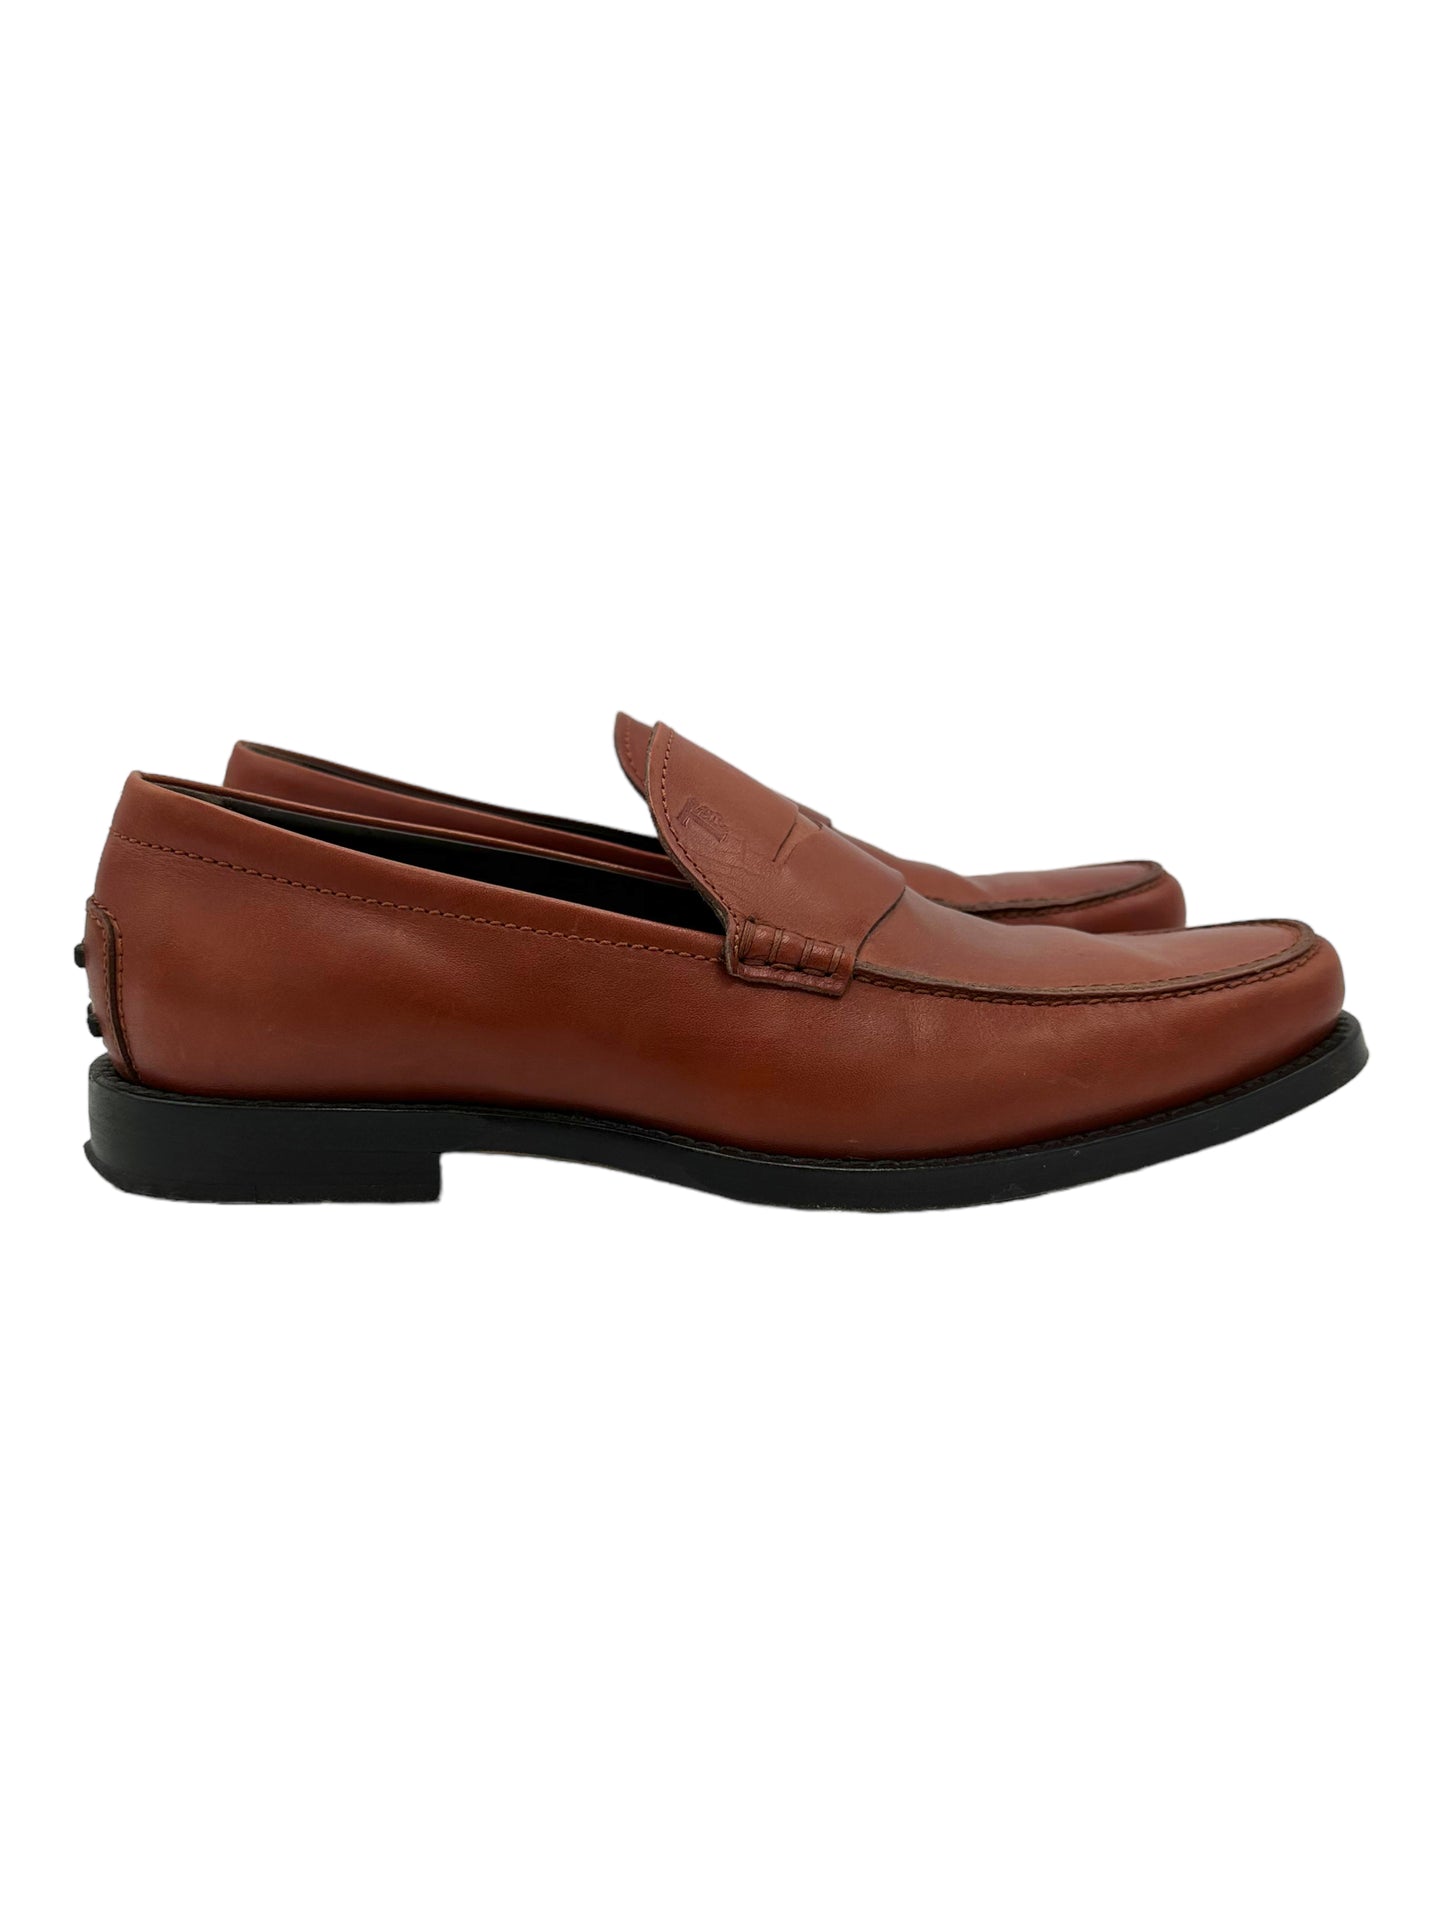 Tods Brown Leather Penny Loafers